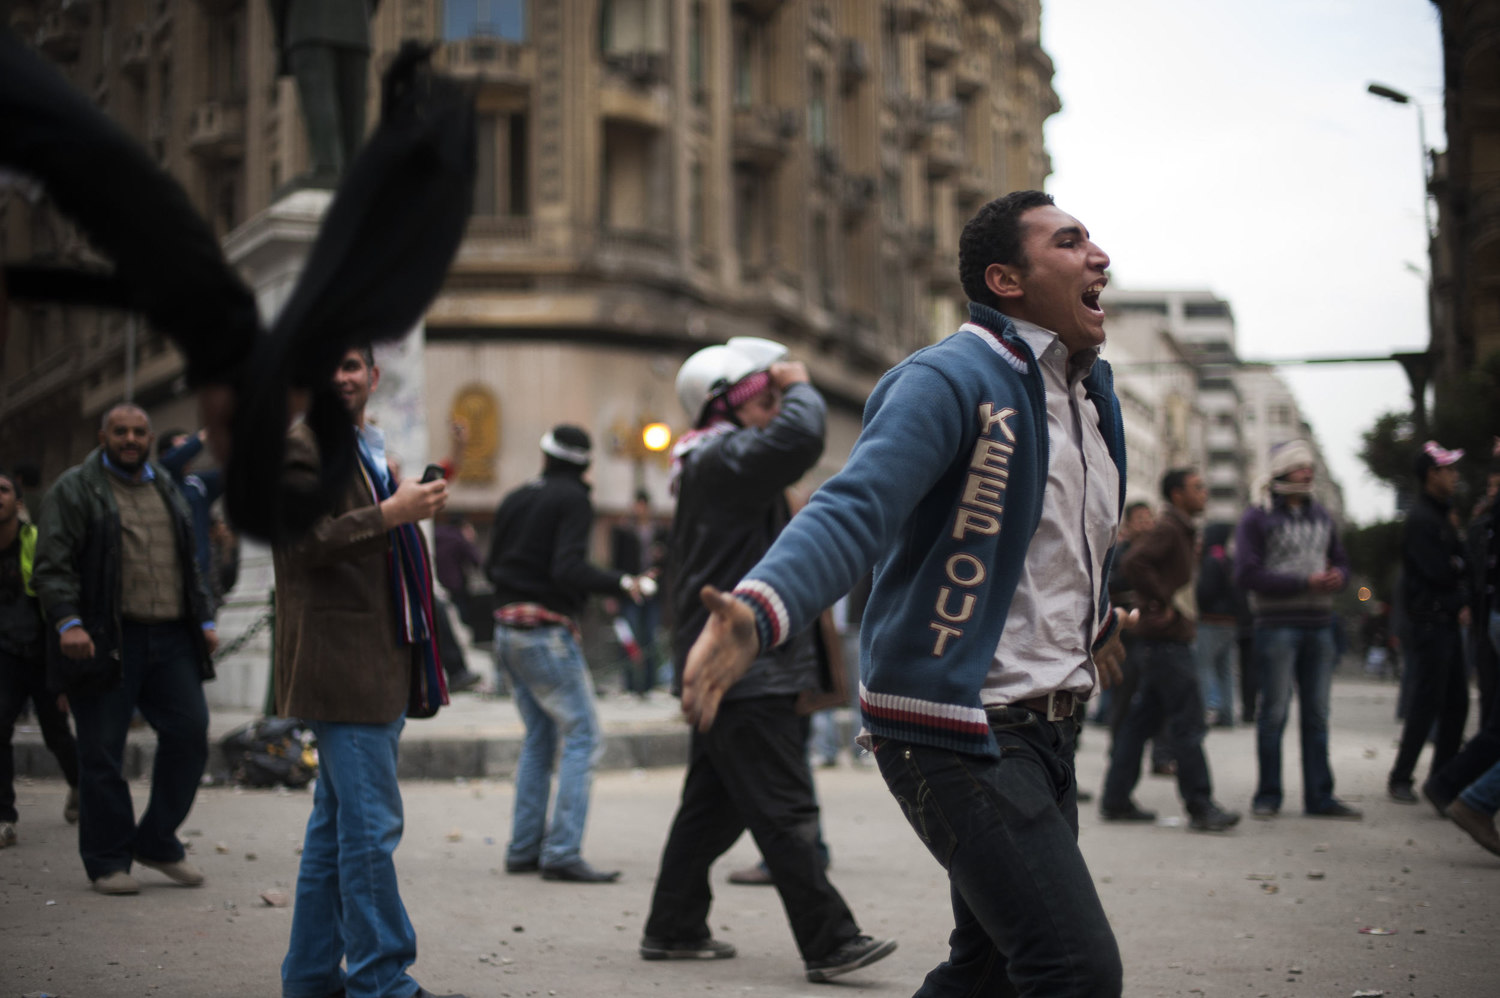  Protestors prematurely rejoice after an inaccurate claim that Mubarak has fled the country. 